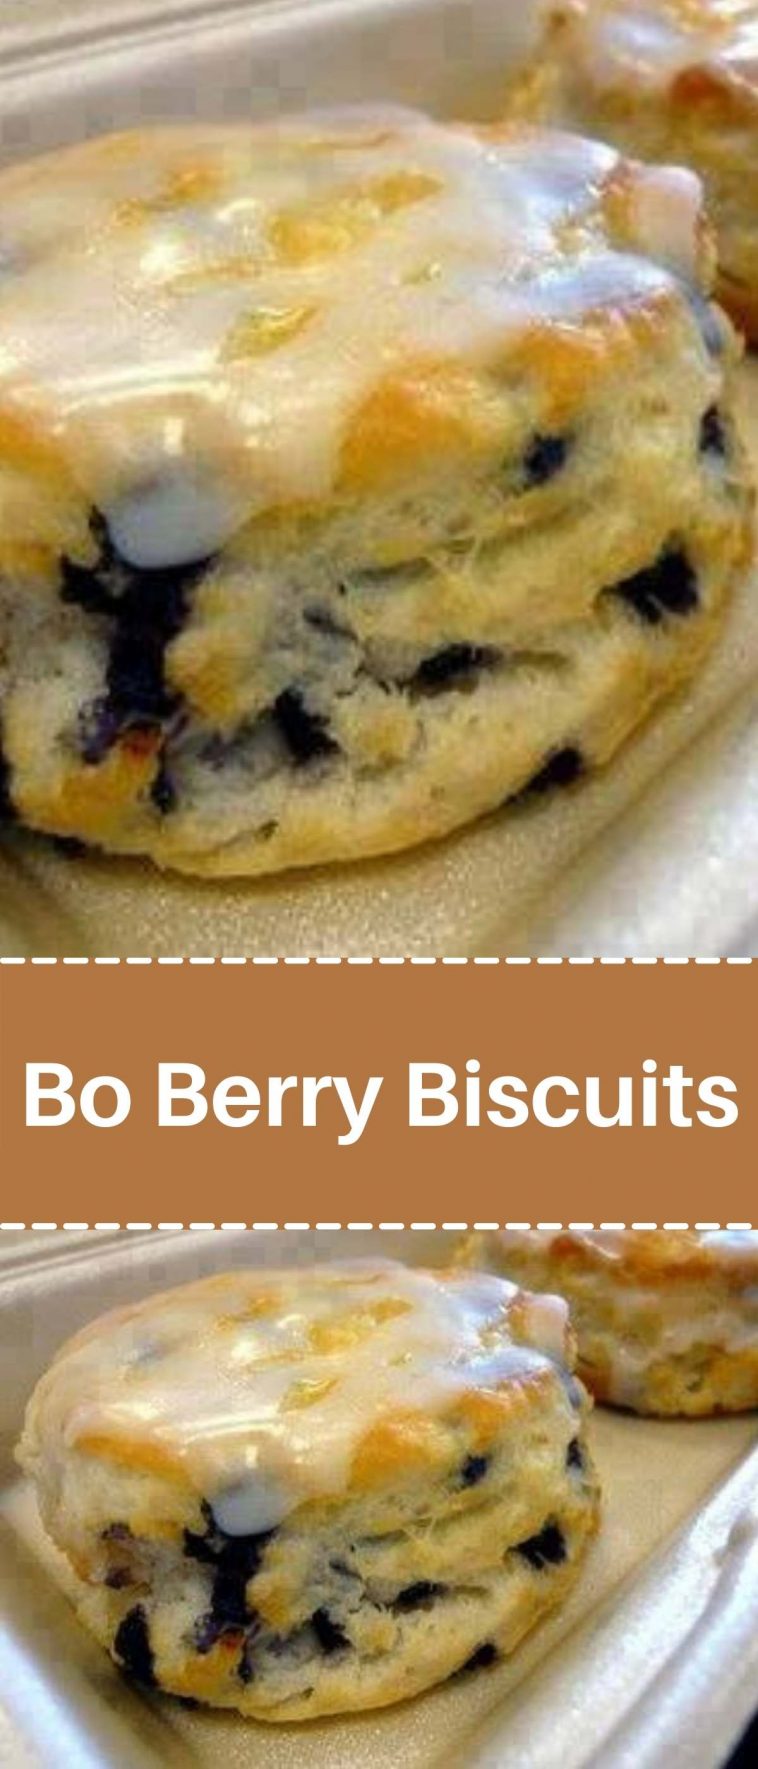 Bo Berry Biscuits